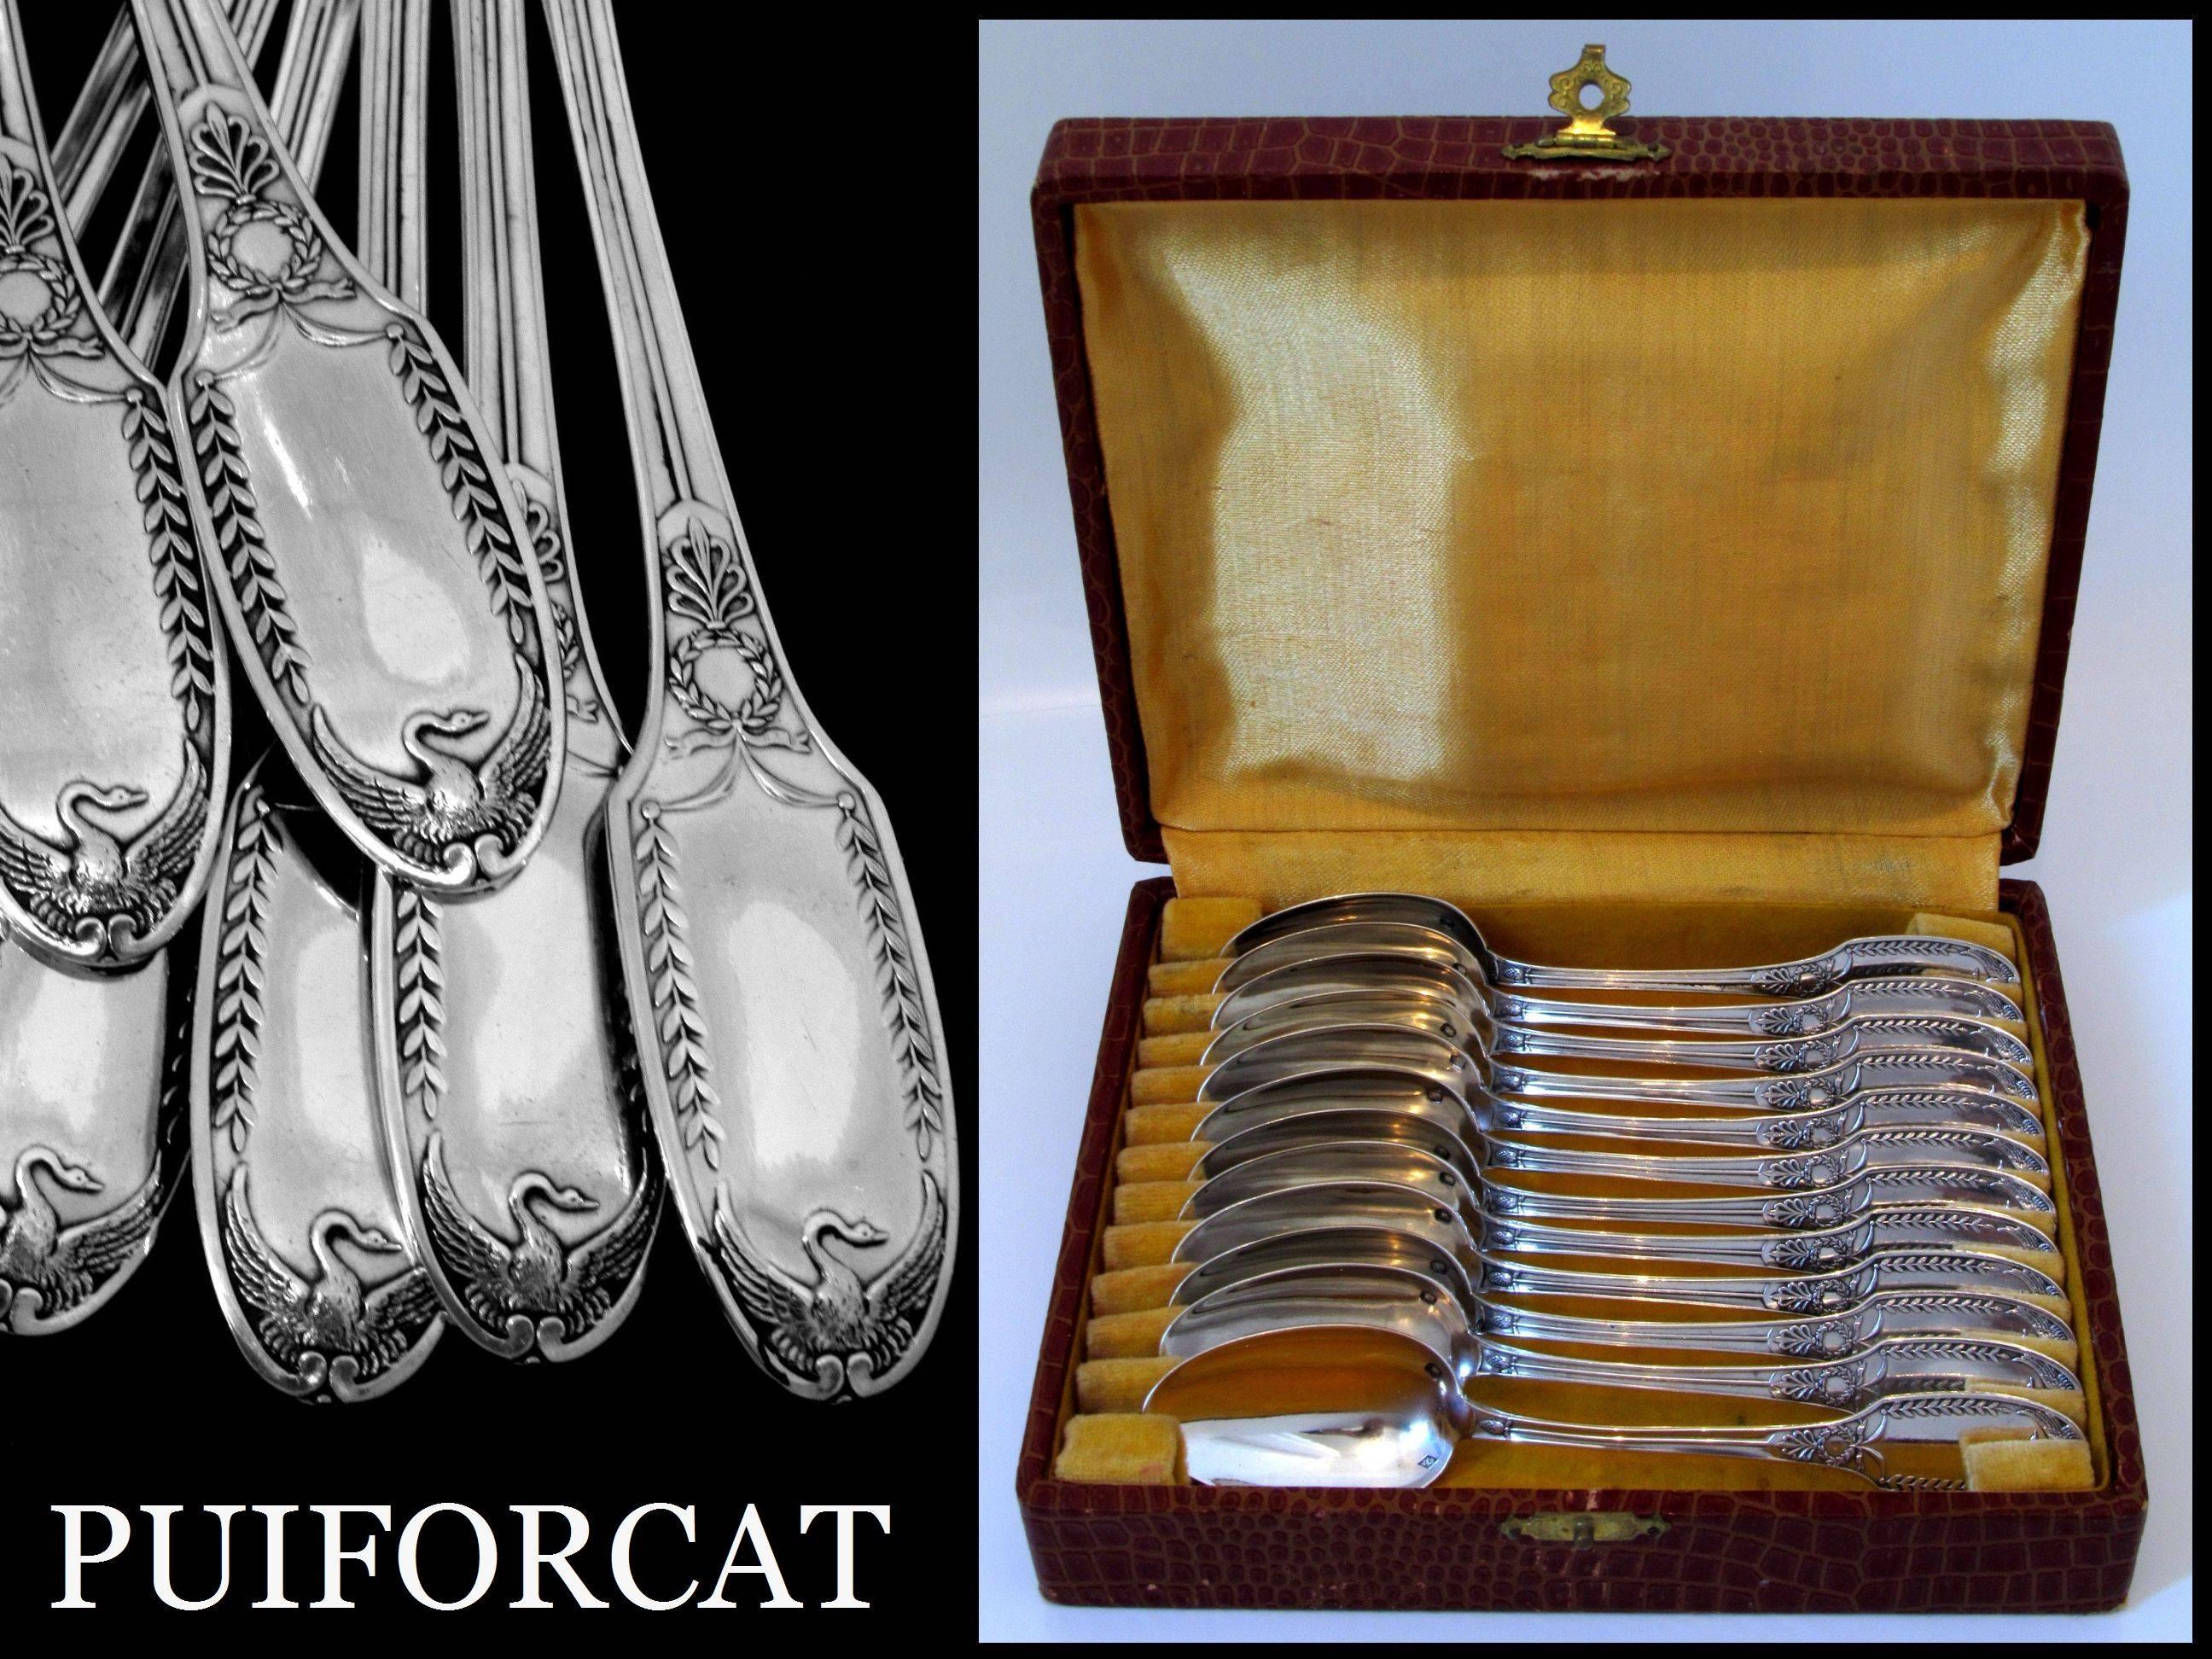 Puiforcat Rare French Sterling Silver Tea or Coffee Spoons Set 12 pc box Swans 1